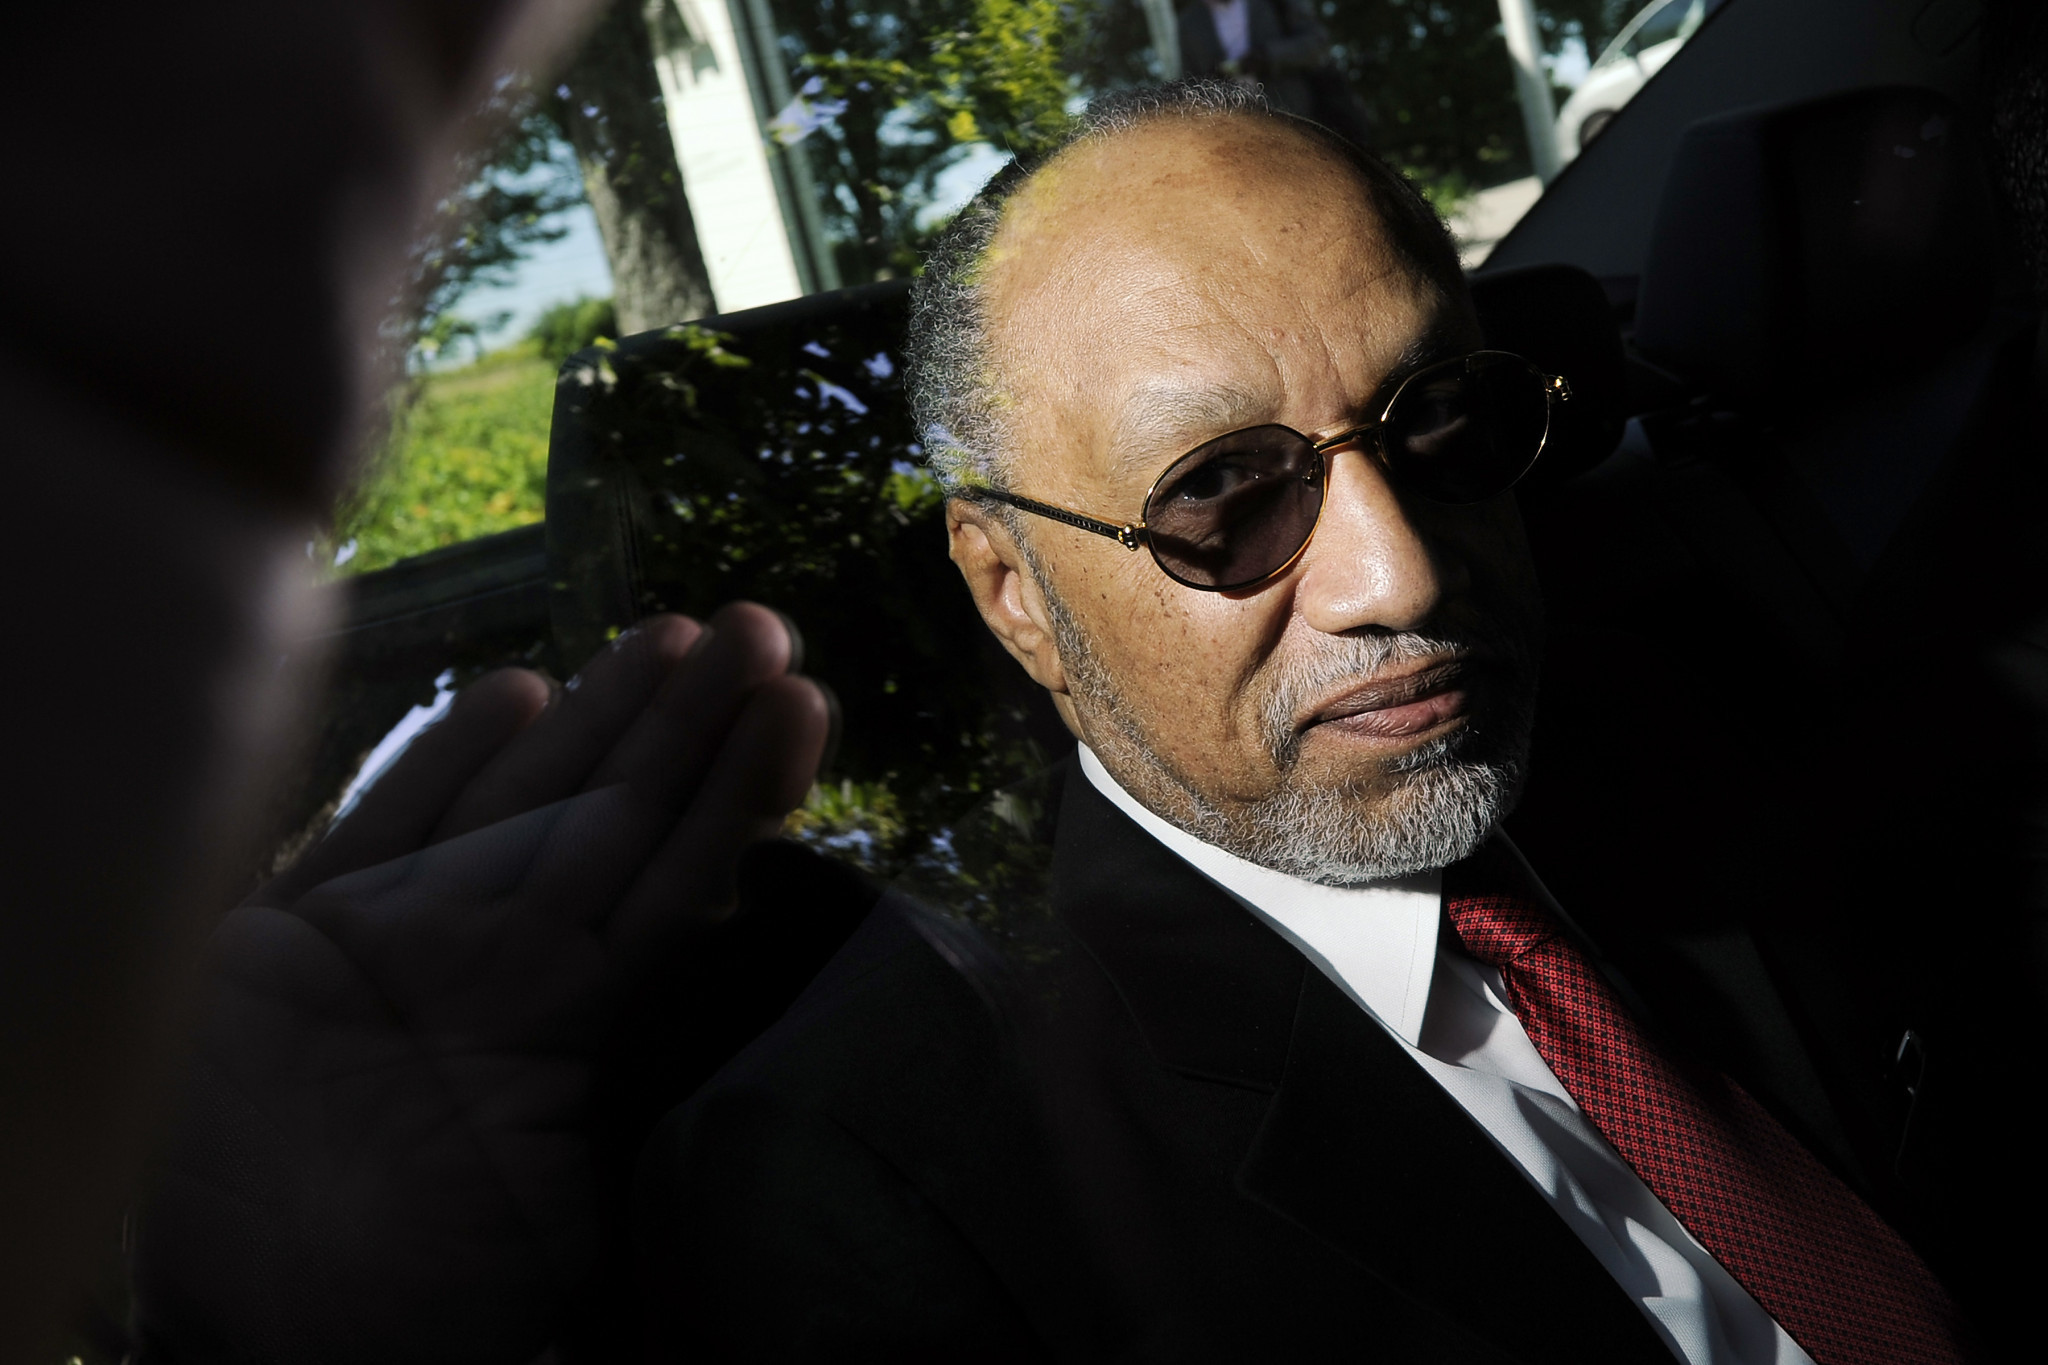 Bin Hammam admits receiving payment from Germany 2006 but denies bribery claims